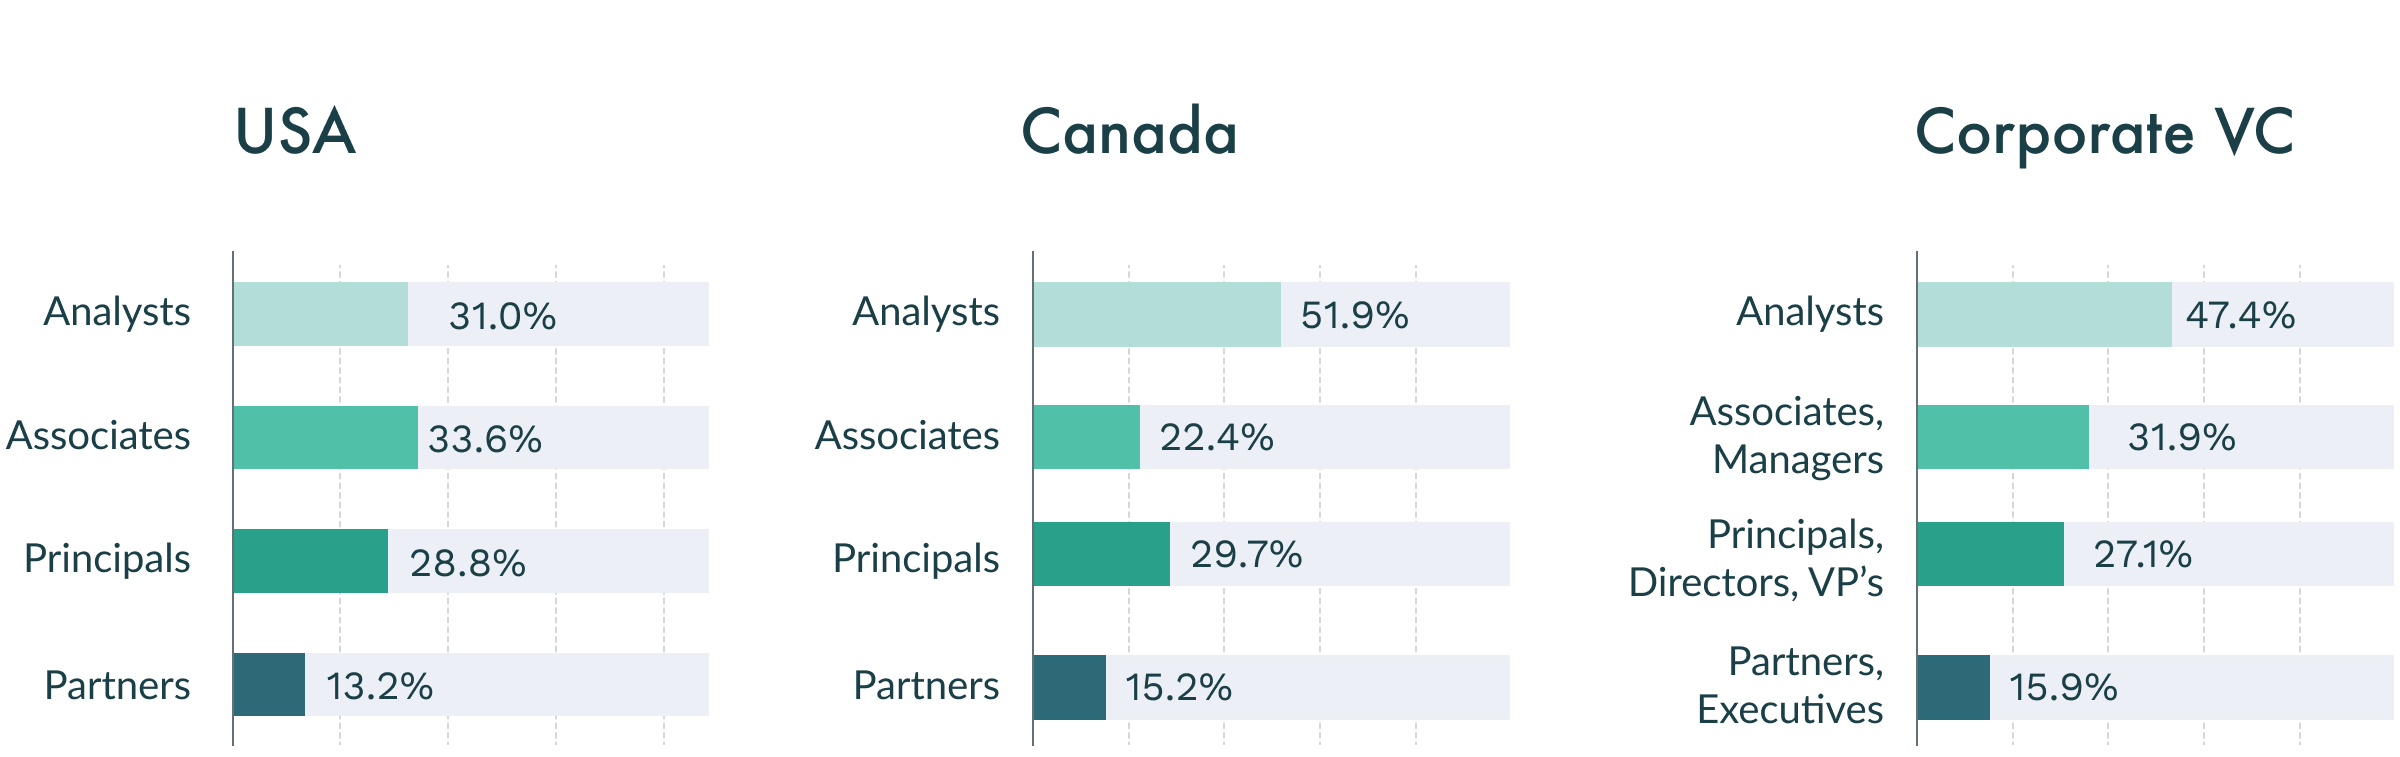 In the USA, female representation for Analysts starts at 31%, and goes down to 13.2% at the Partners level. For Canada, it goes from 51.9% to 15.2%; for Corporate VC's, it goes from 47.4% to 15.9%, respectively.